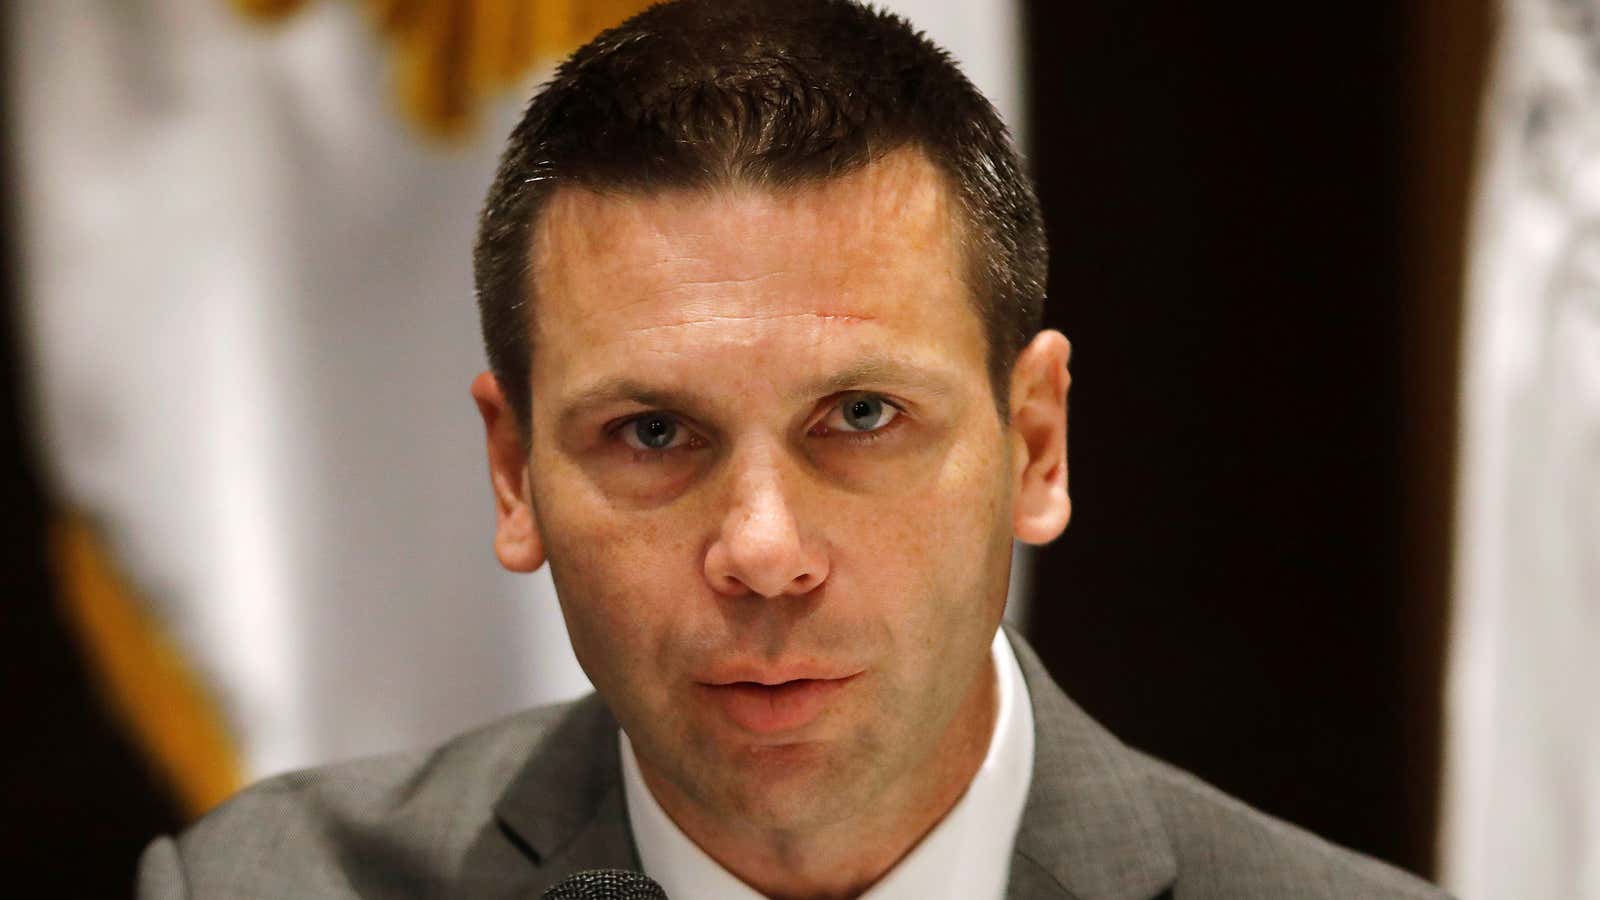 McAleenan is being targeted in a familiar pattern.